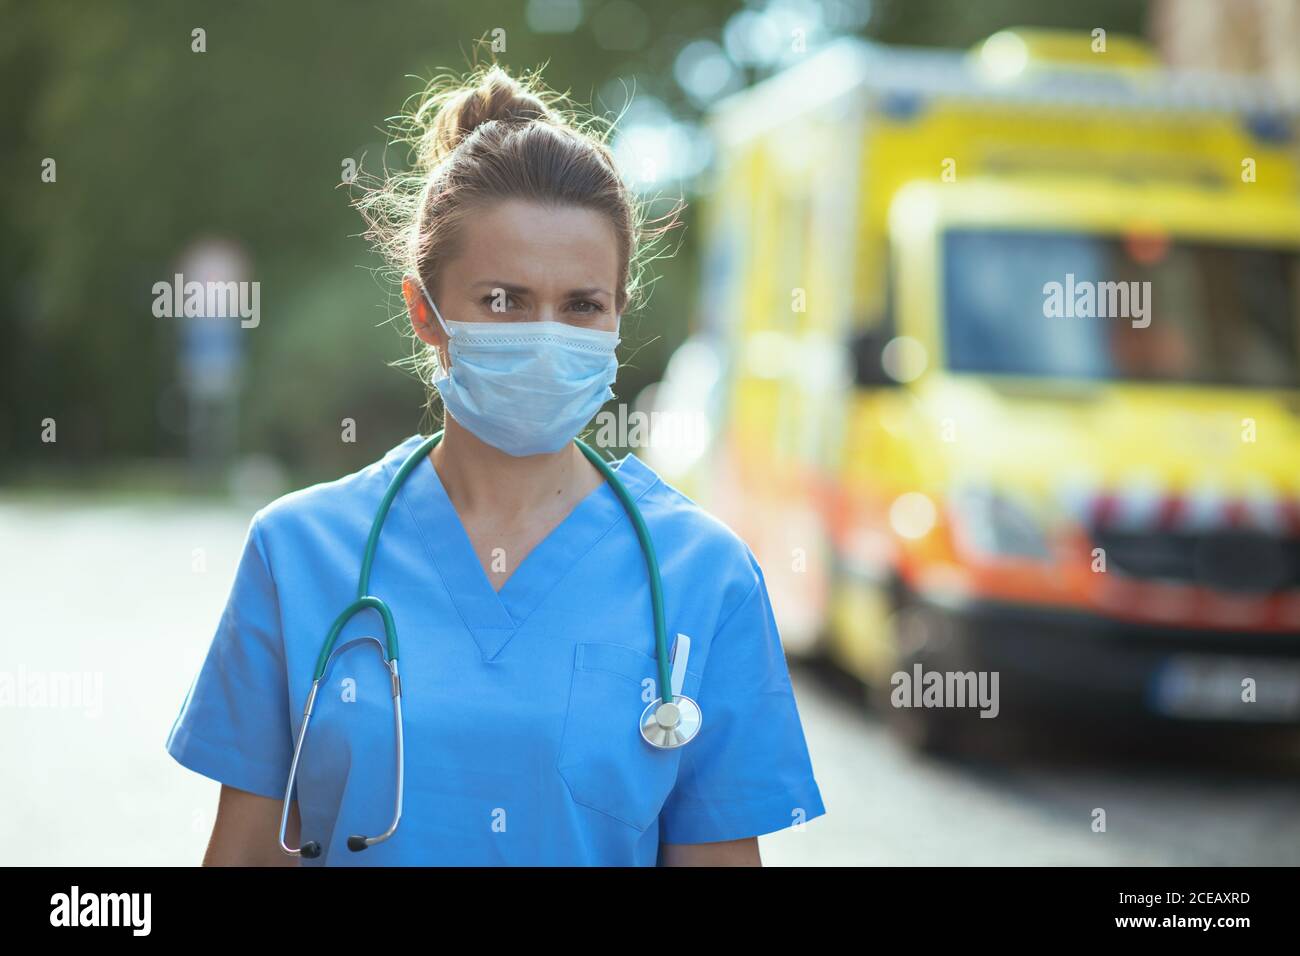 coronavirus pandemic. Portrait of modern medical doctor woman in uniform with stethoscope and medical mask outside near ambulance. Stock Photo